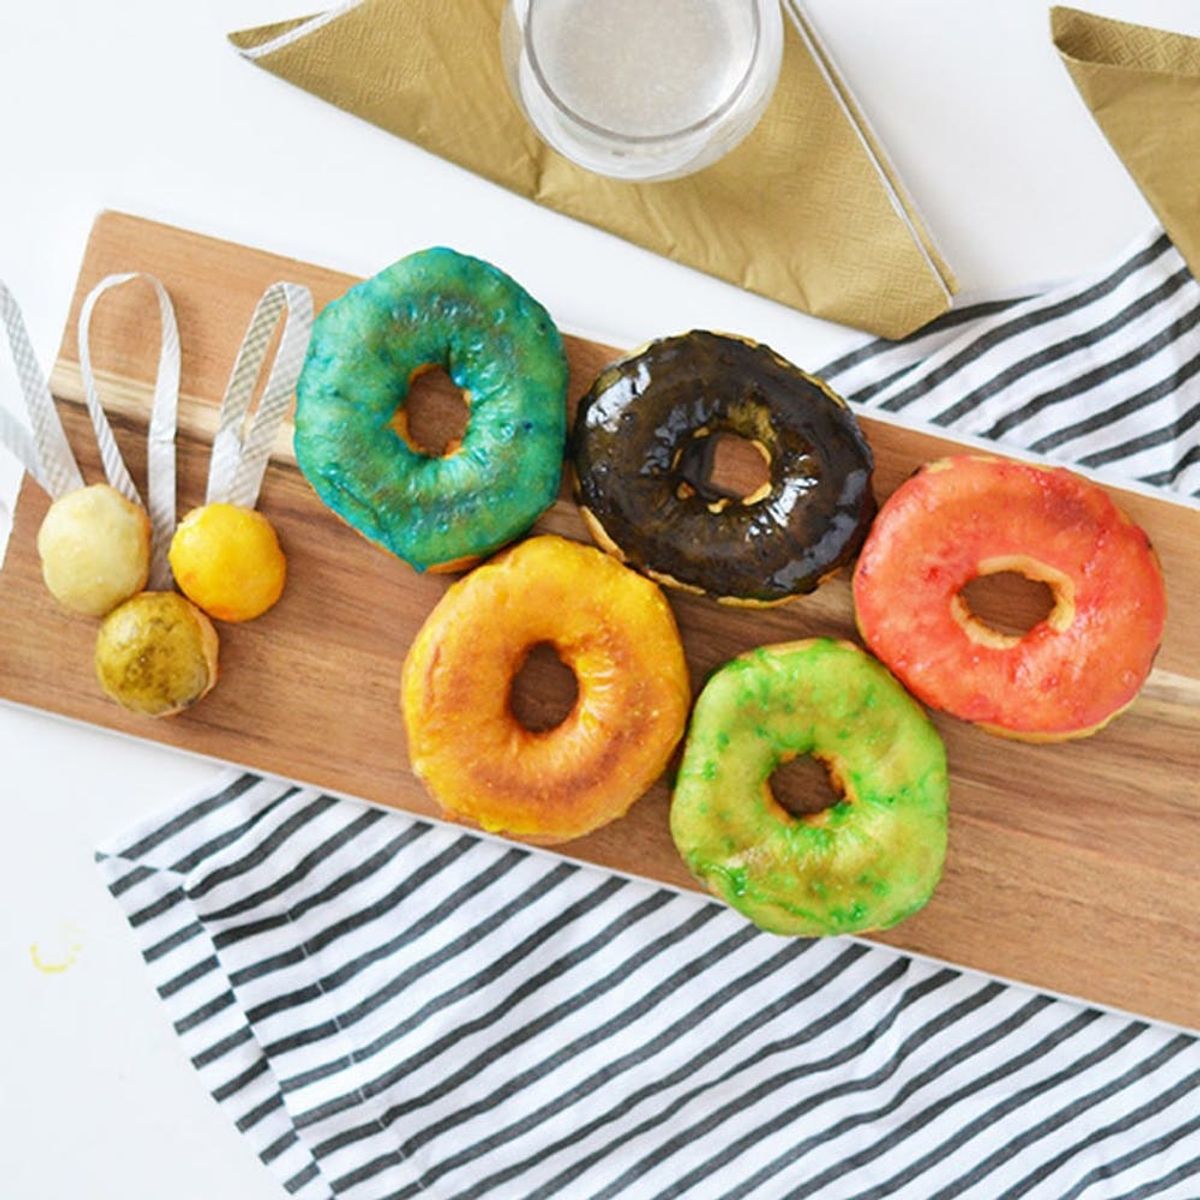 These Olympic Donuts Are Going to Win You a Gold Medal